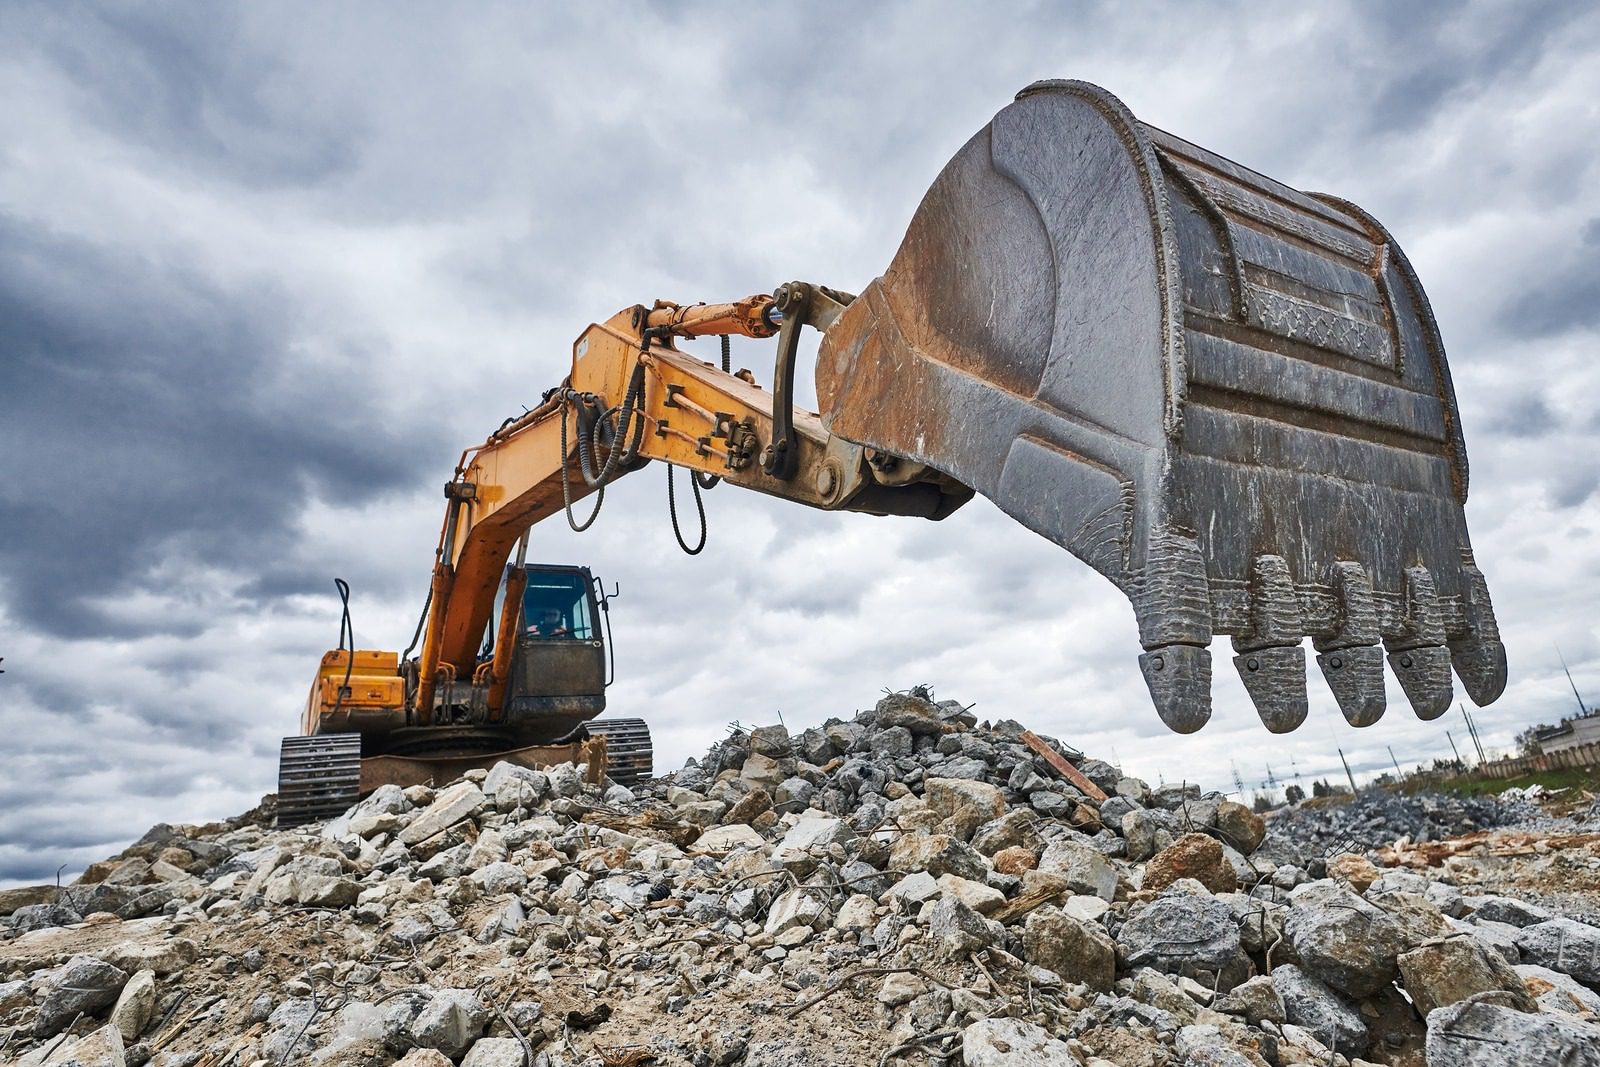 How Do You Lose An 18-Ton Excavator?